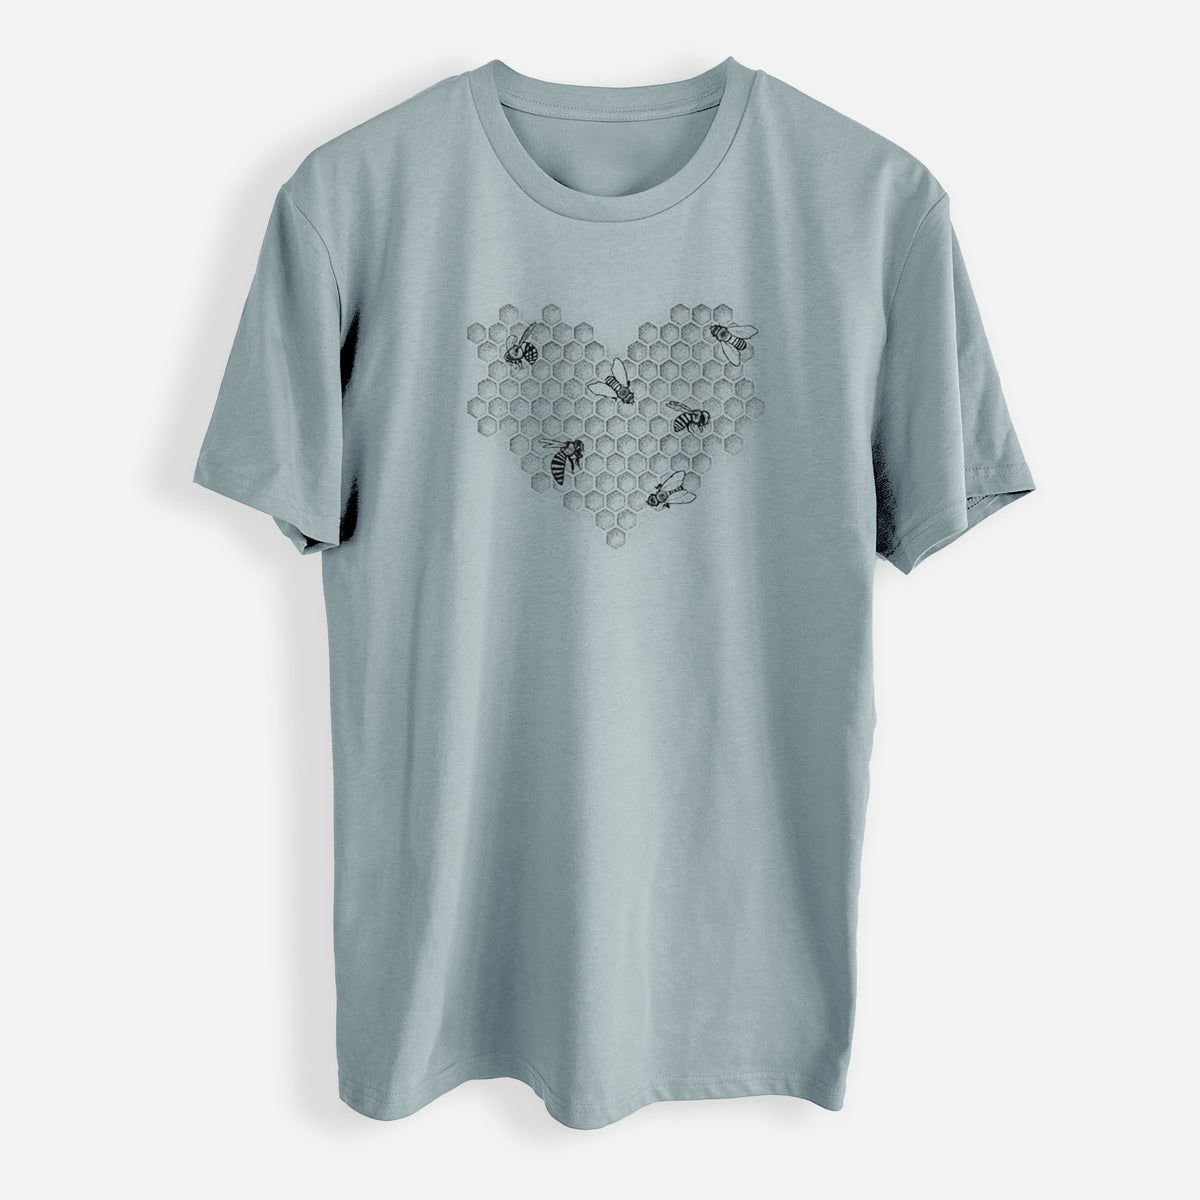 Honeycomb Heart with Bees - Mens Everyday Staple Tee